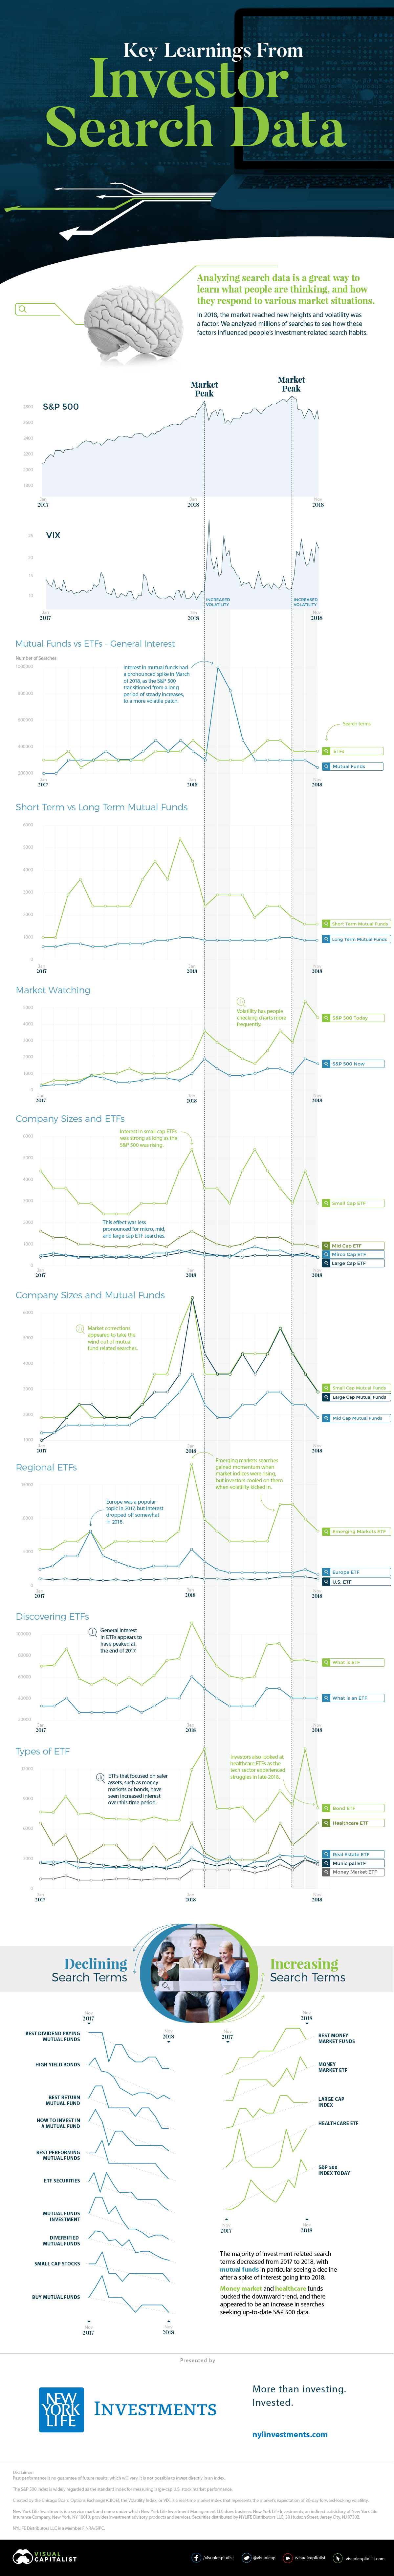 Visualizing the Search Patterns of Investors Over the Last 2 Years